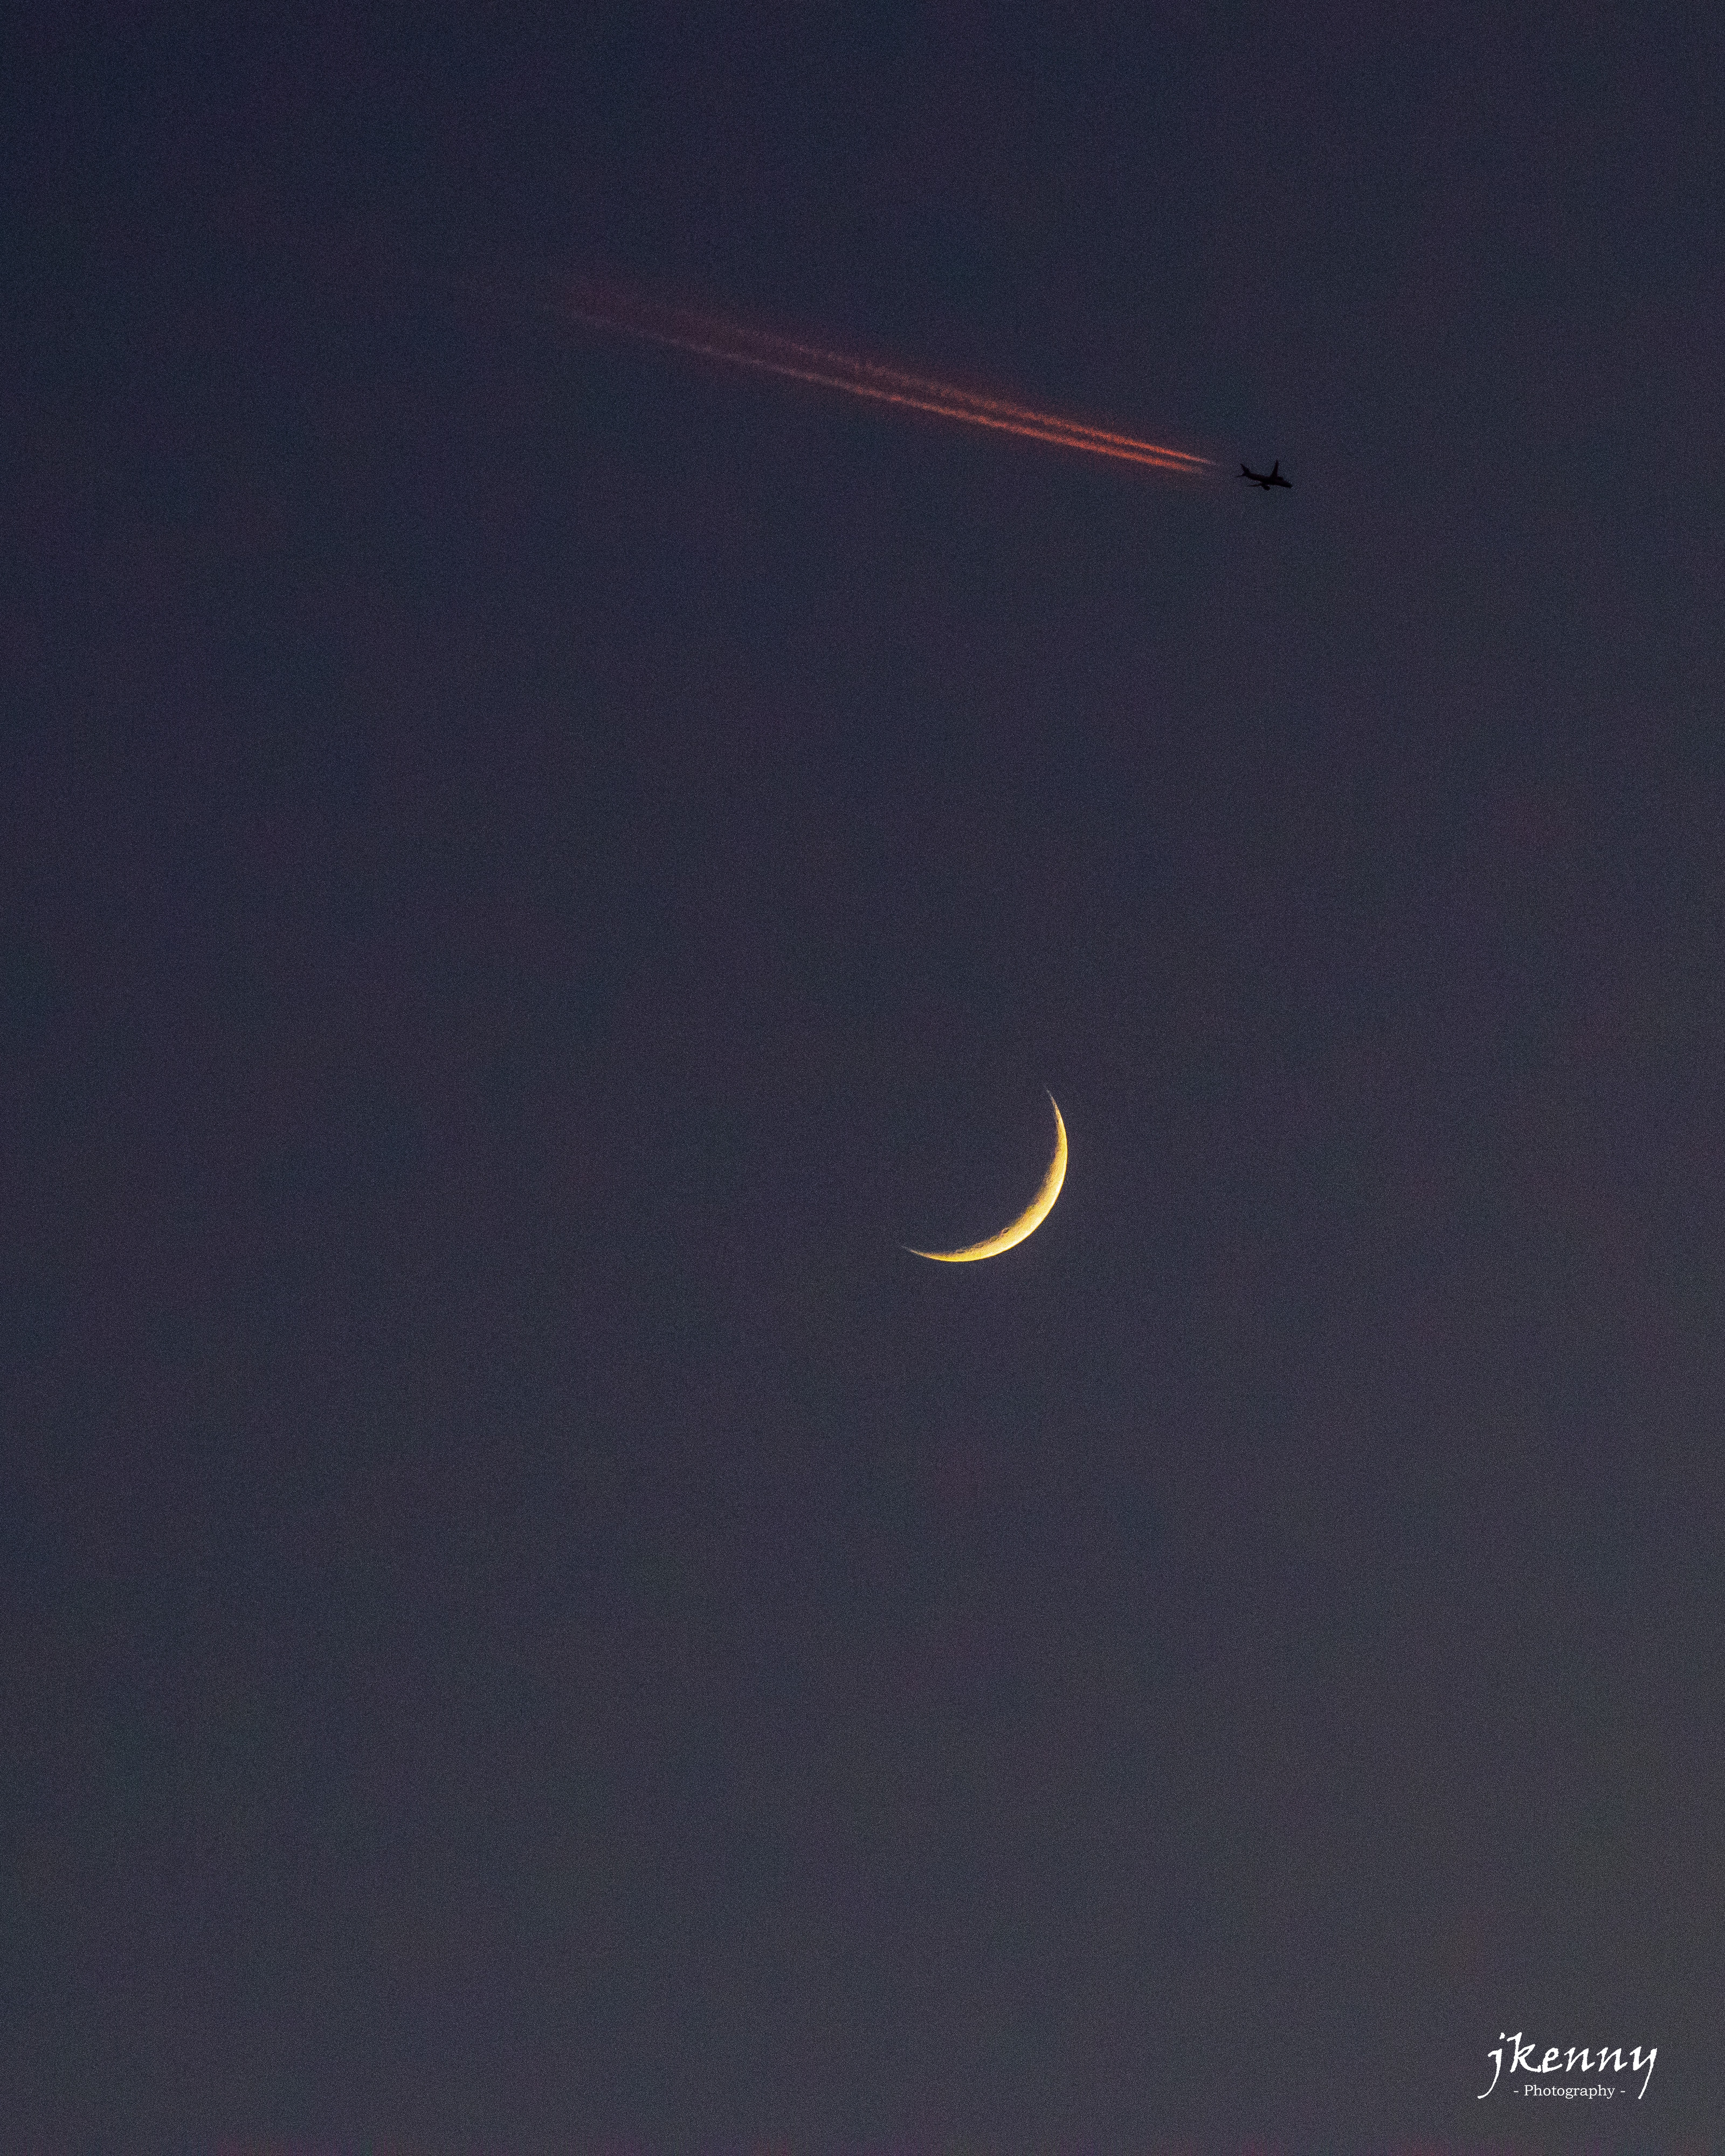 A plane flying past the moon.